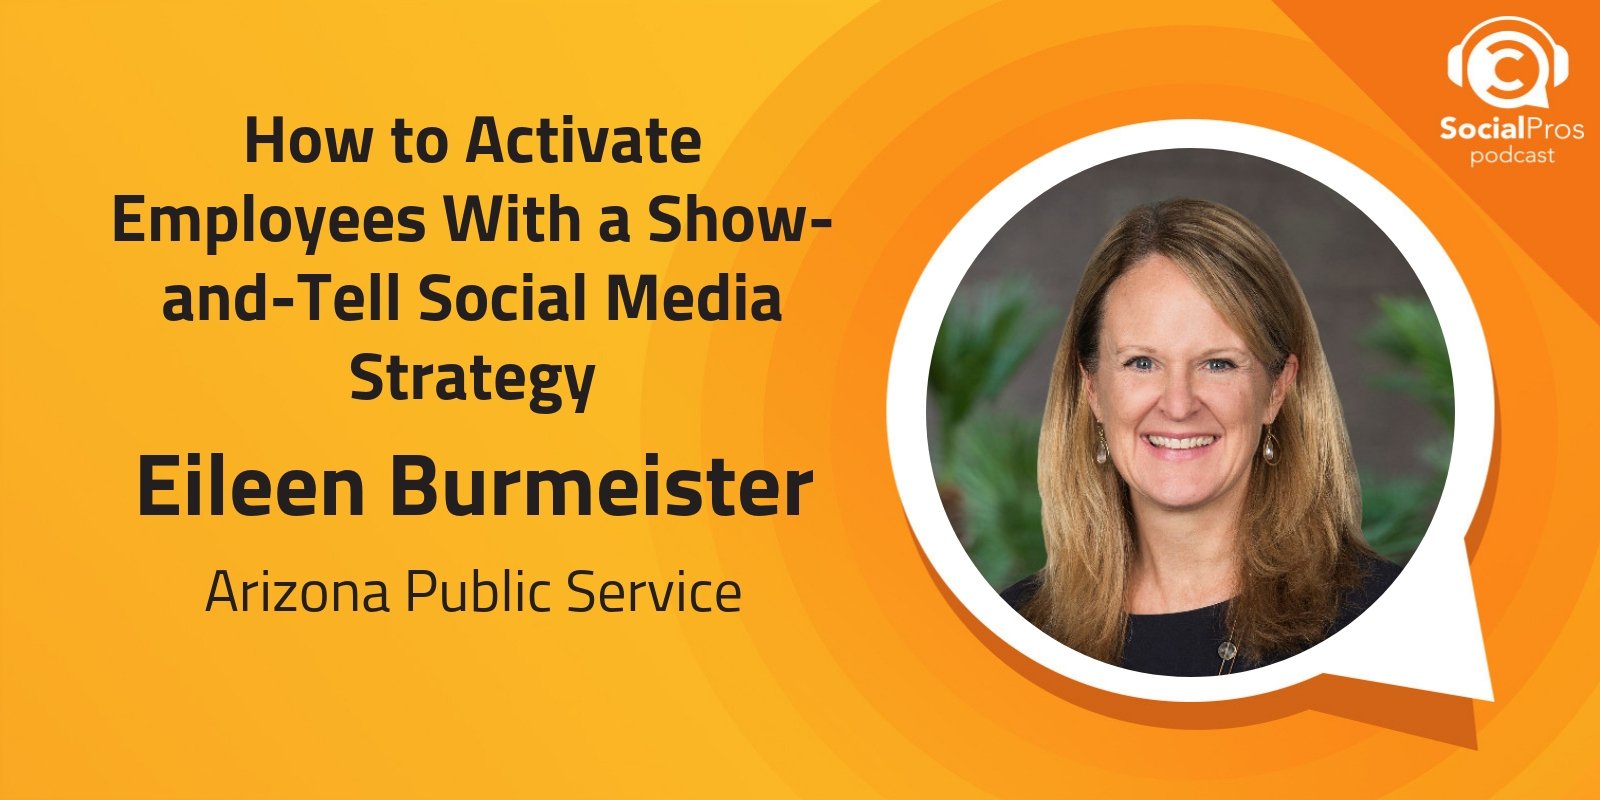 How to Activate Employees With a Show-and-Tell Social Media Strategy